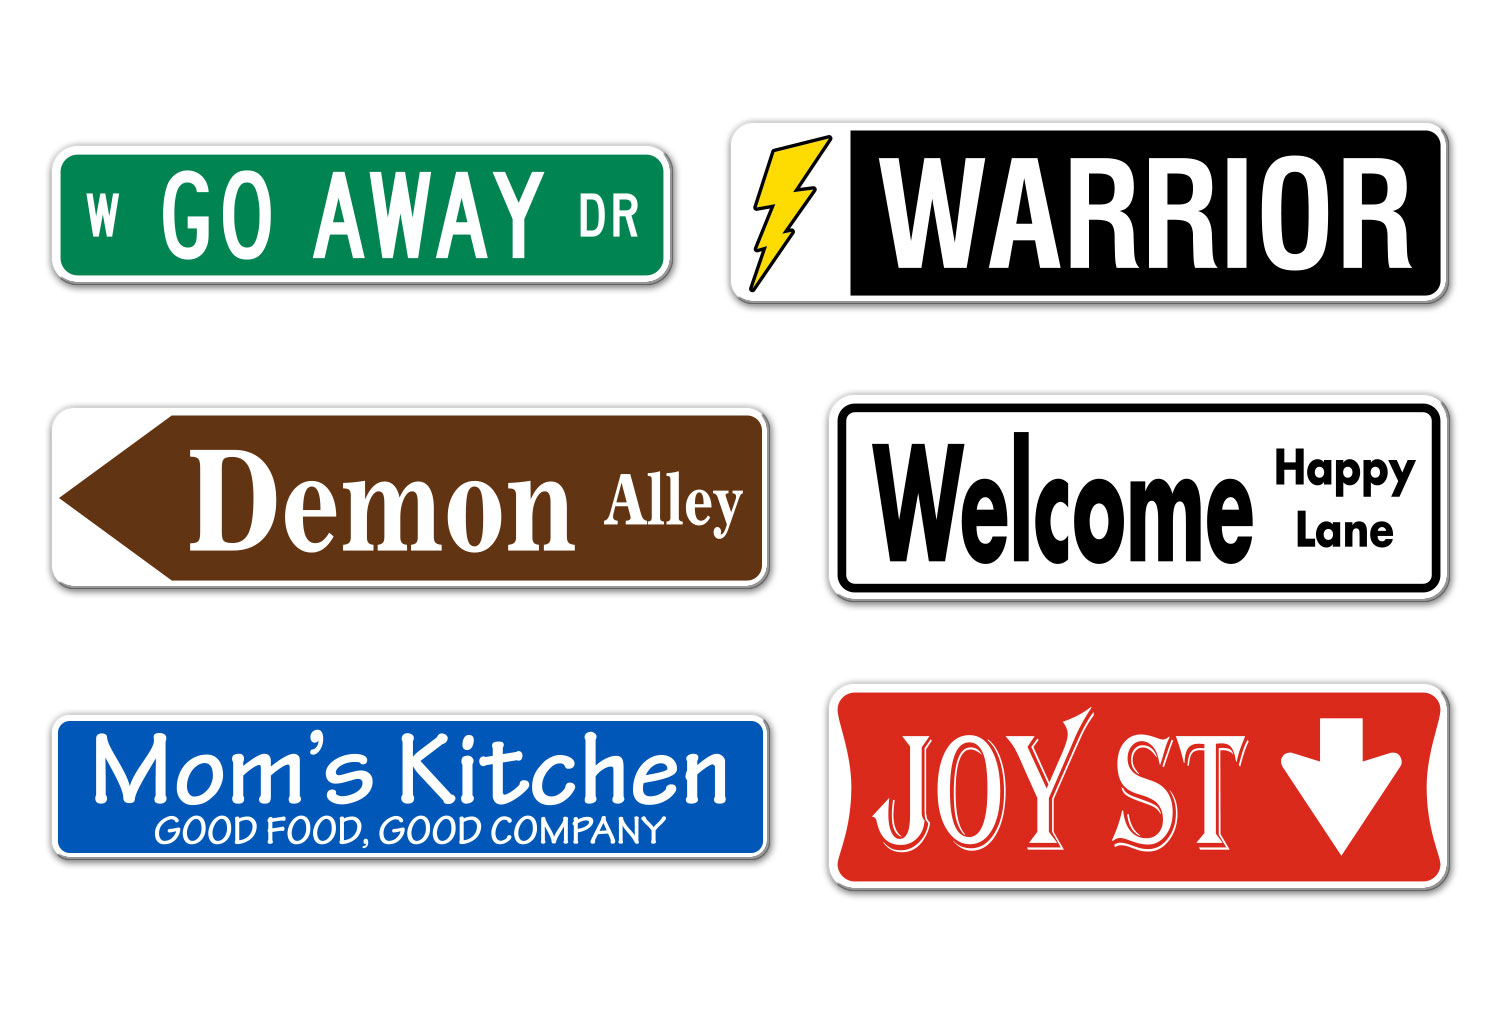 Samples of Printed Personalized Street Name Signs